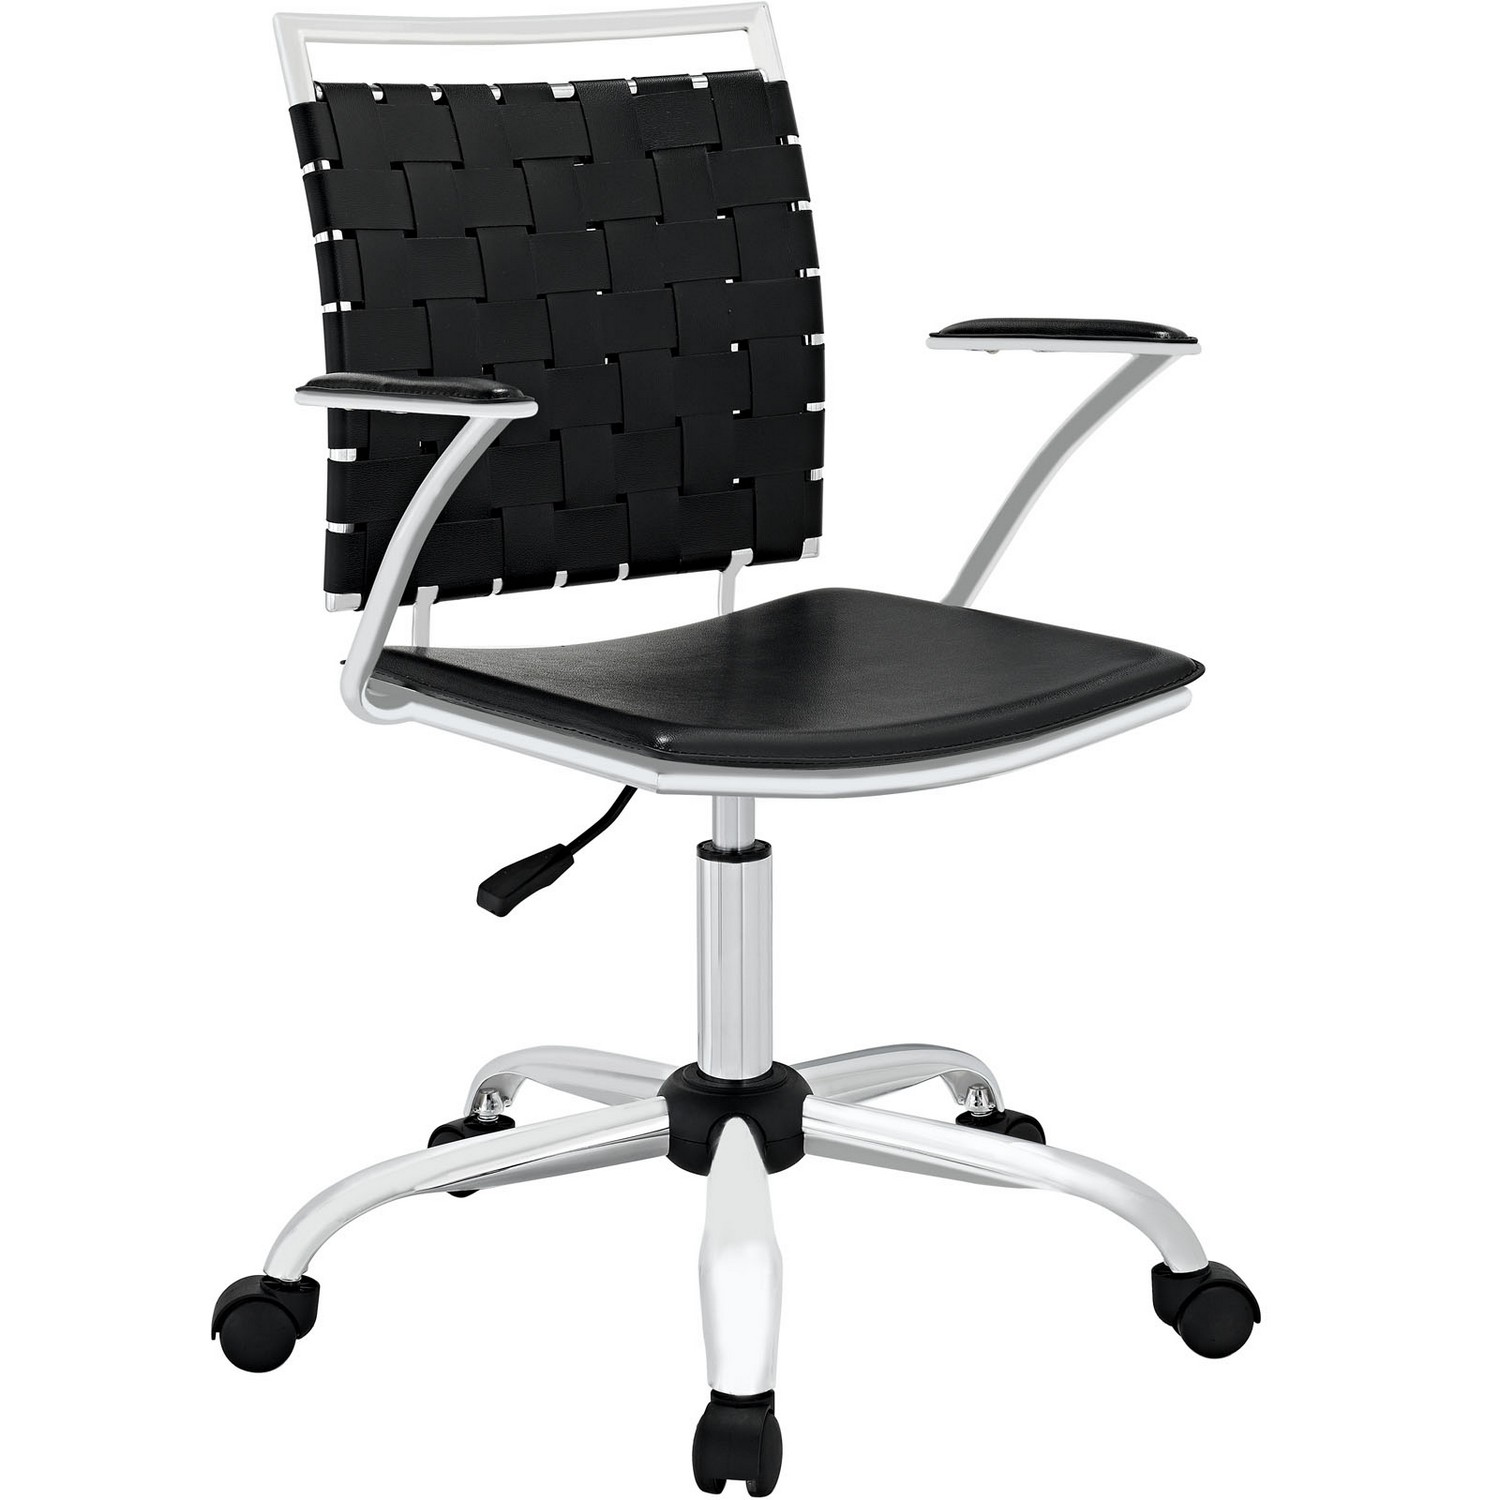 Modway Fuse Office Chair - Black